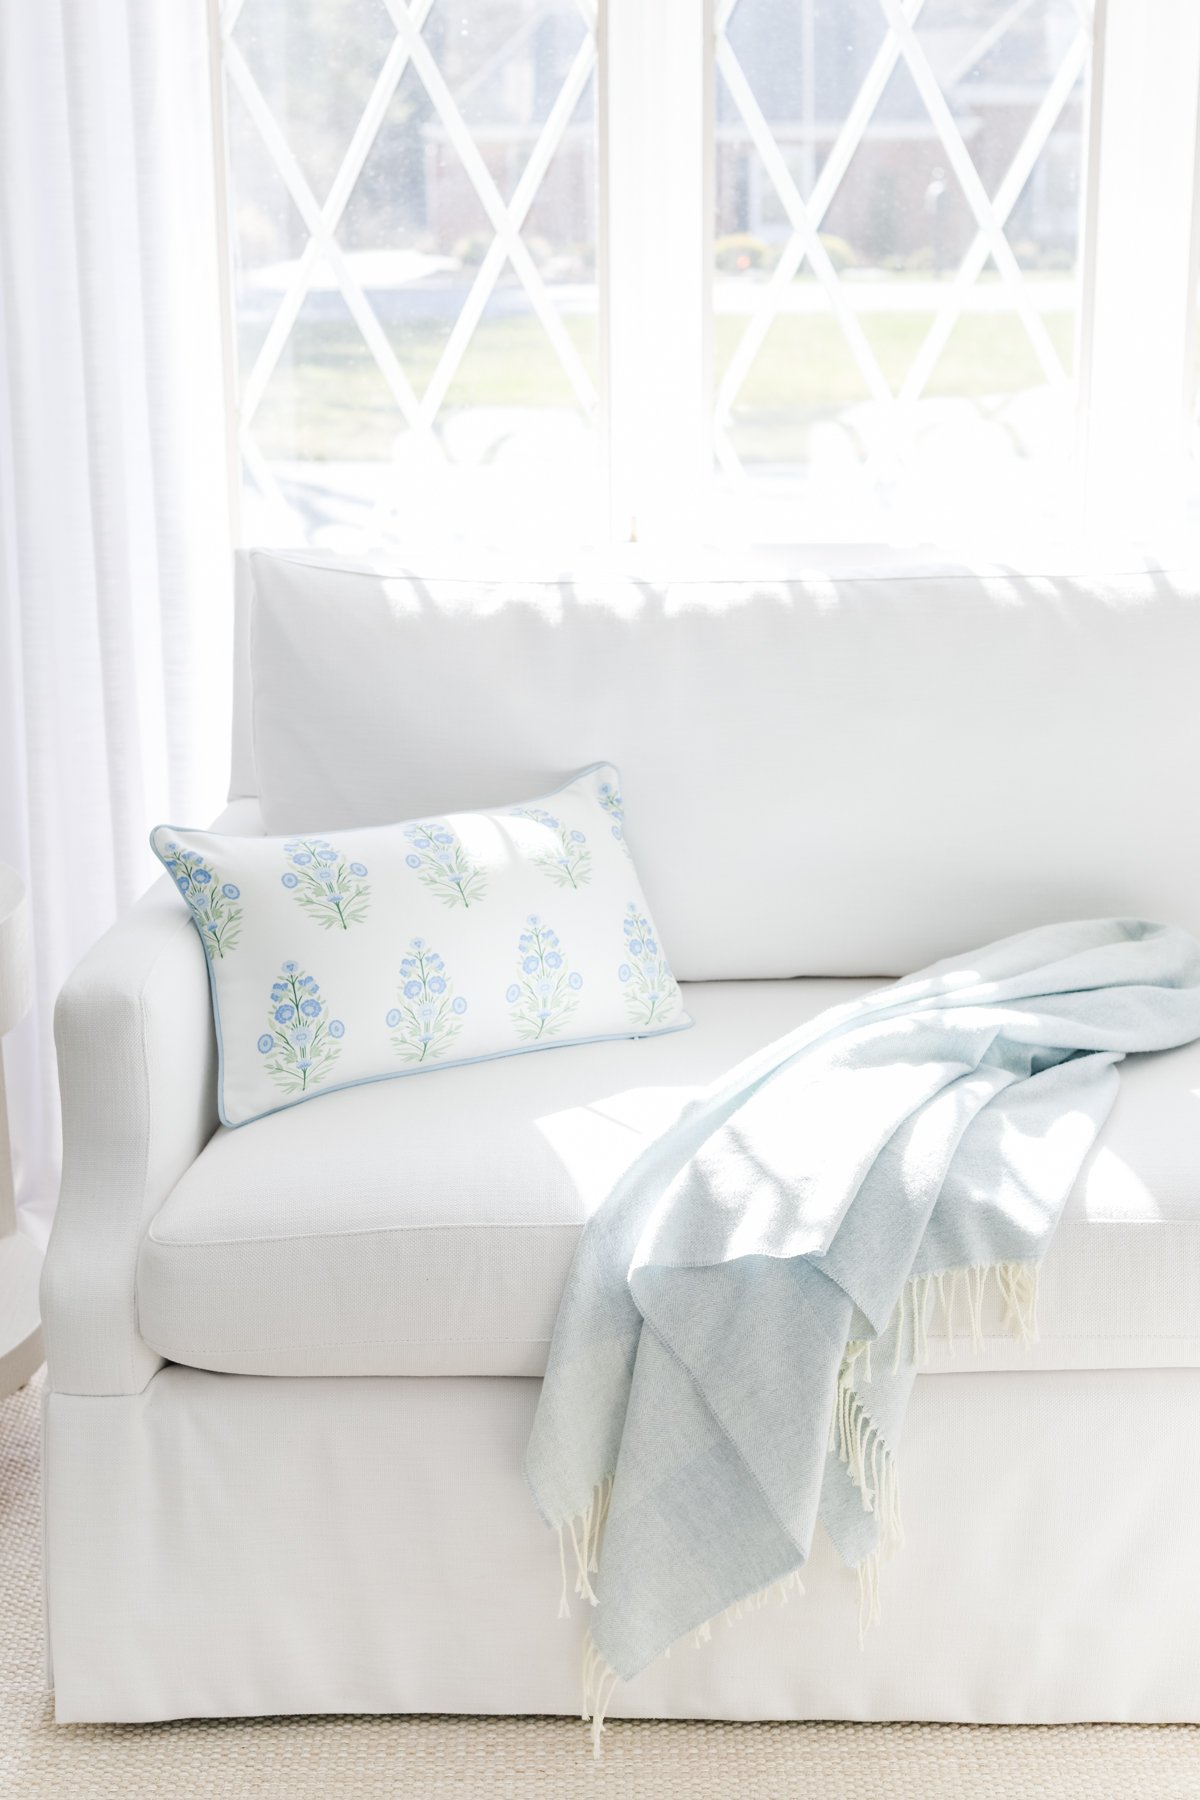 A white sofa with a floral cushion and a light blue throw blanket is positioned near a window with geometric patterns. Bright natural light fills the room.